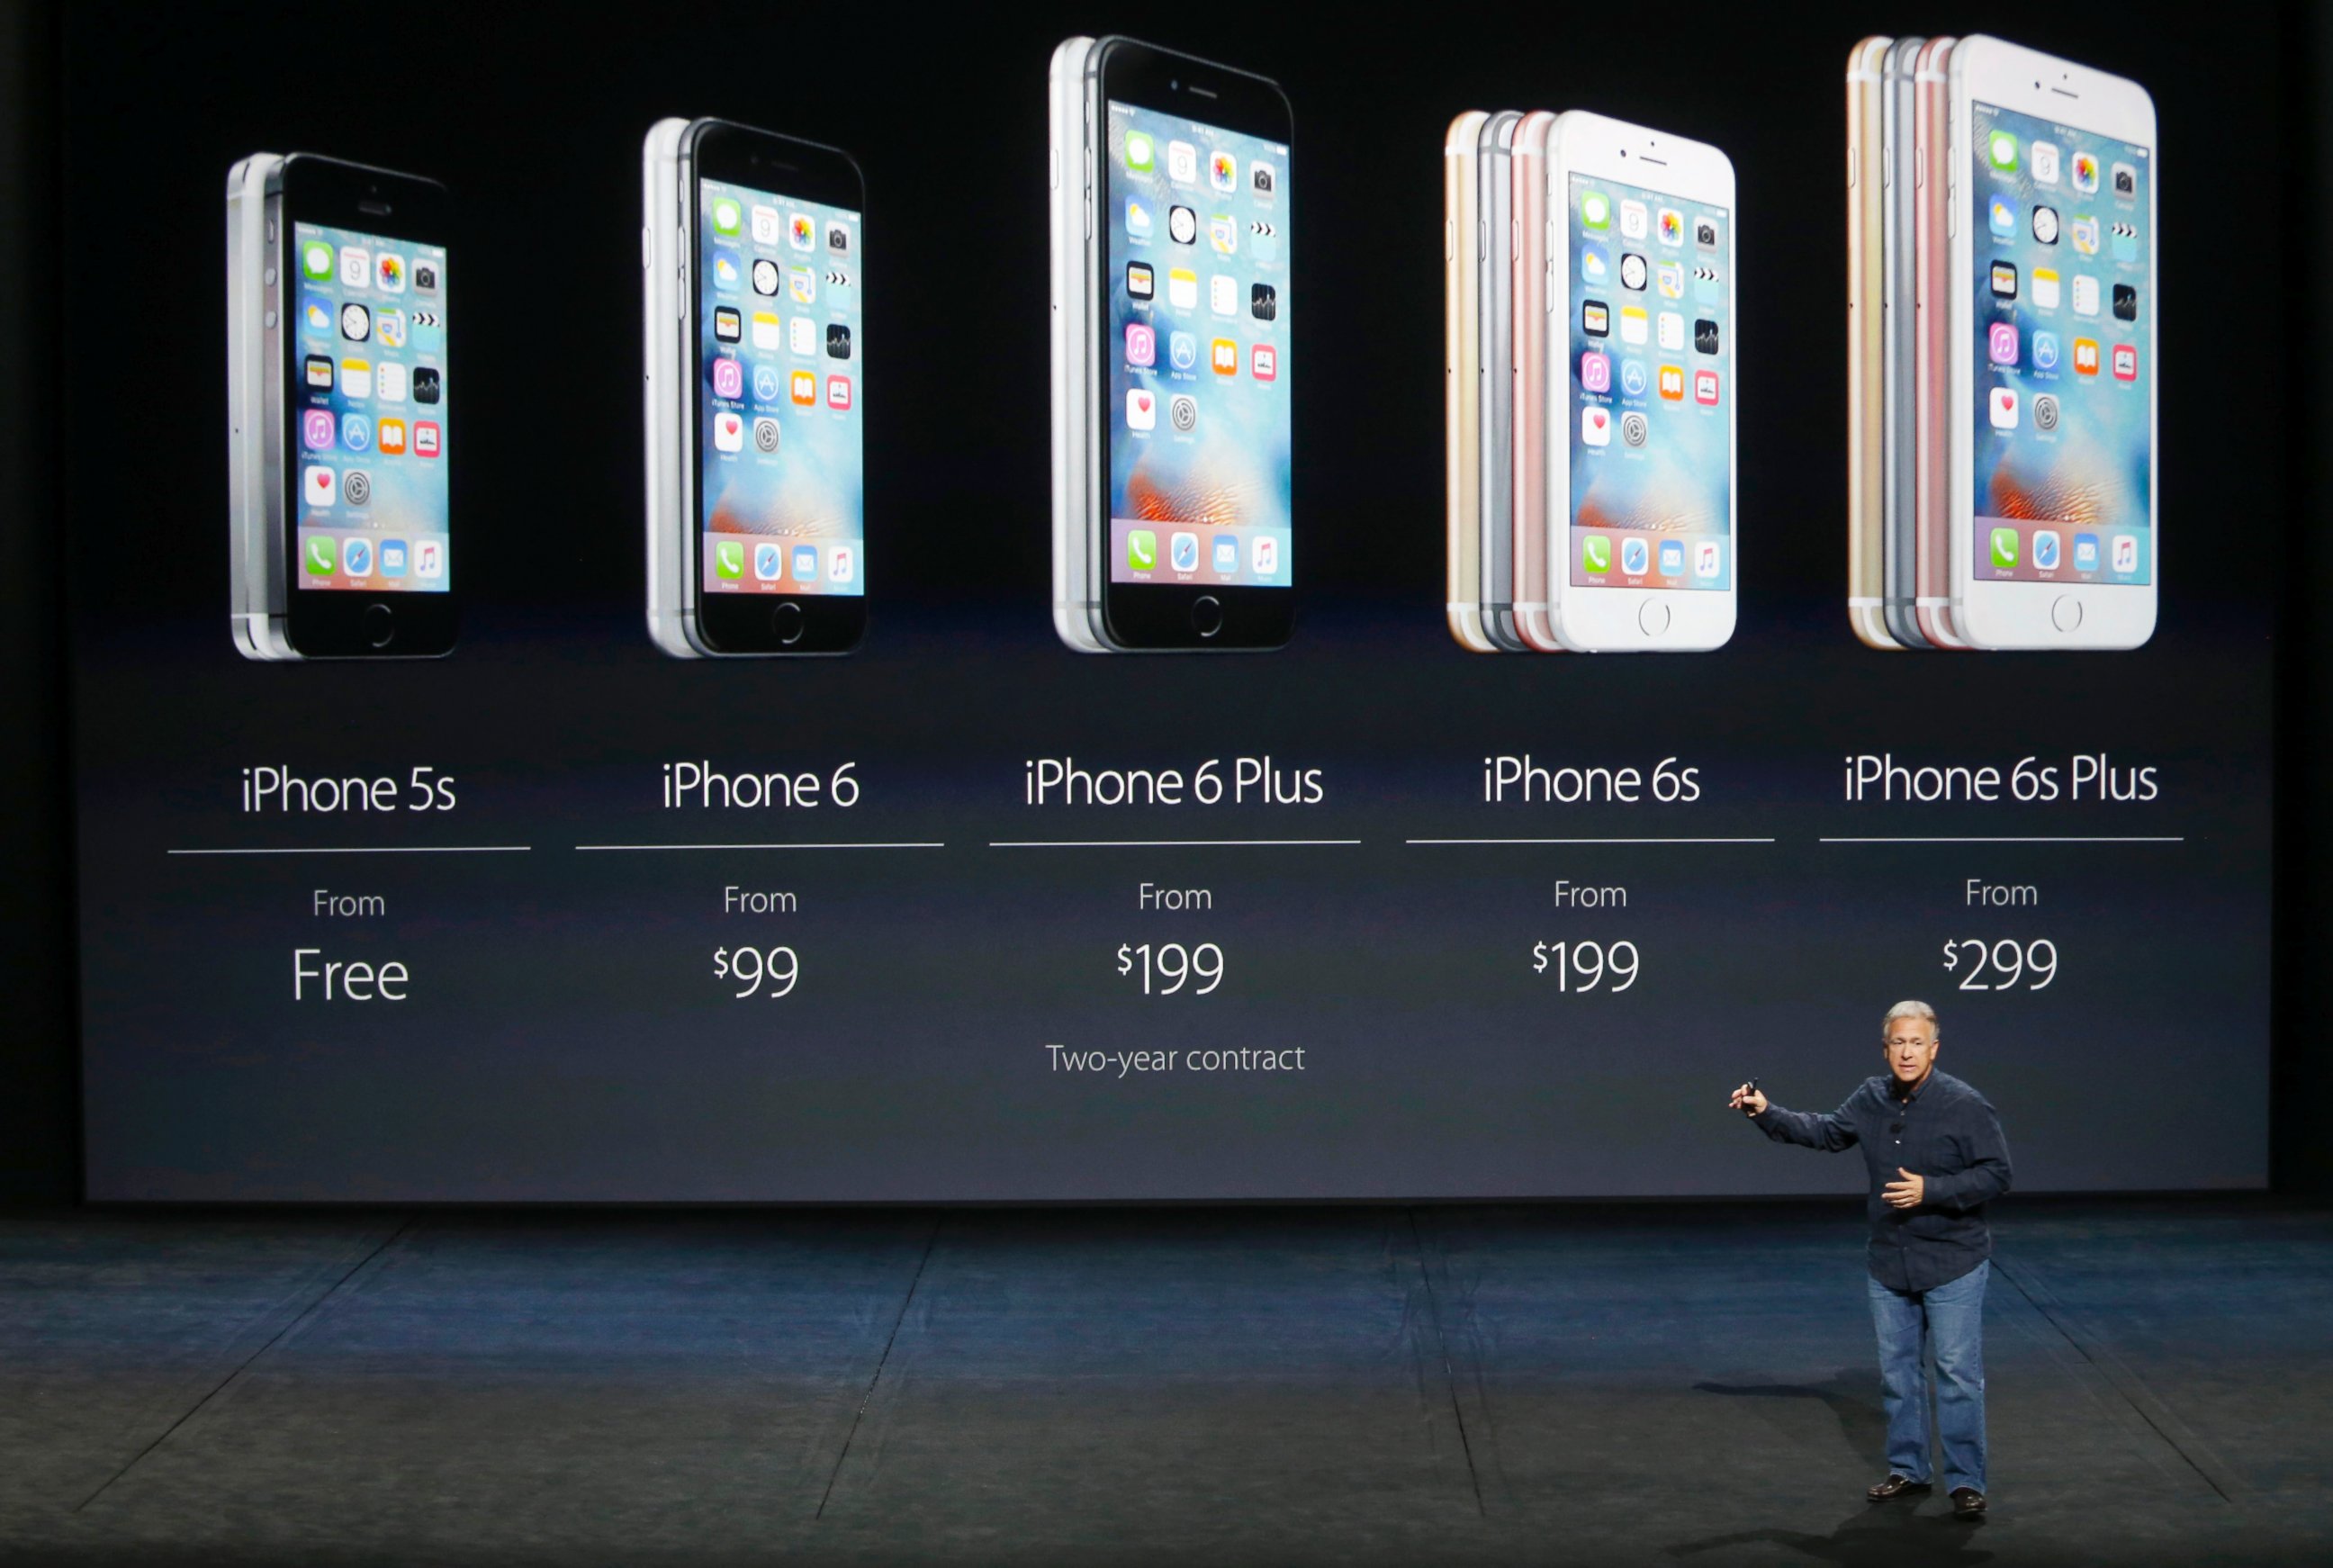 PHOTO: Phil Schiller, Senior Vice President of Worldwide Marketing at Apple Inc, speaks about pricing for the entire iPhone line during an Apple media event in San Francisco, Sept. 9, 2015.